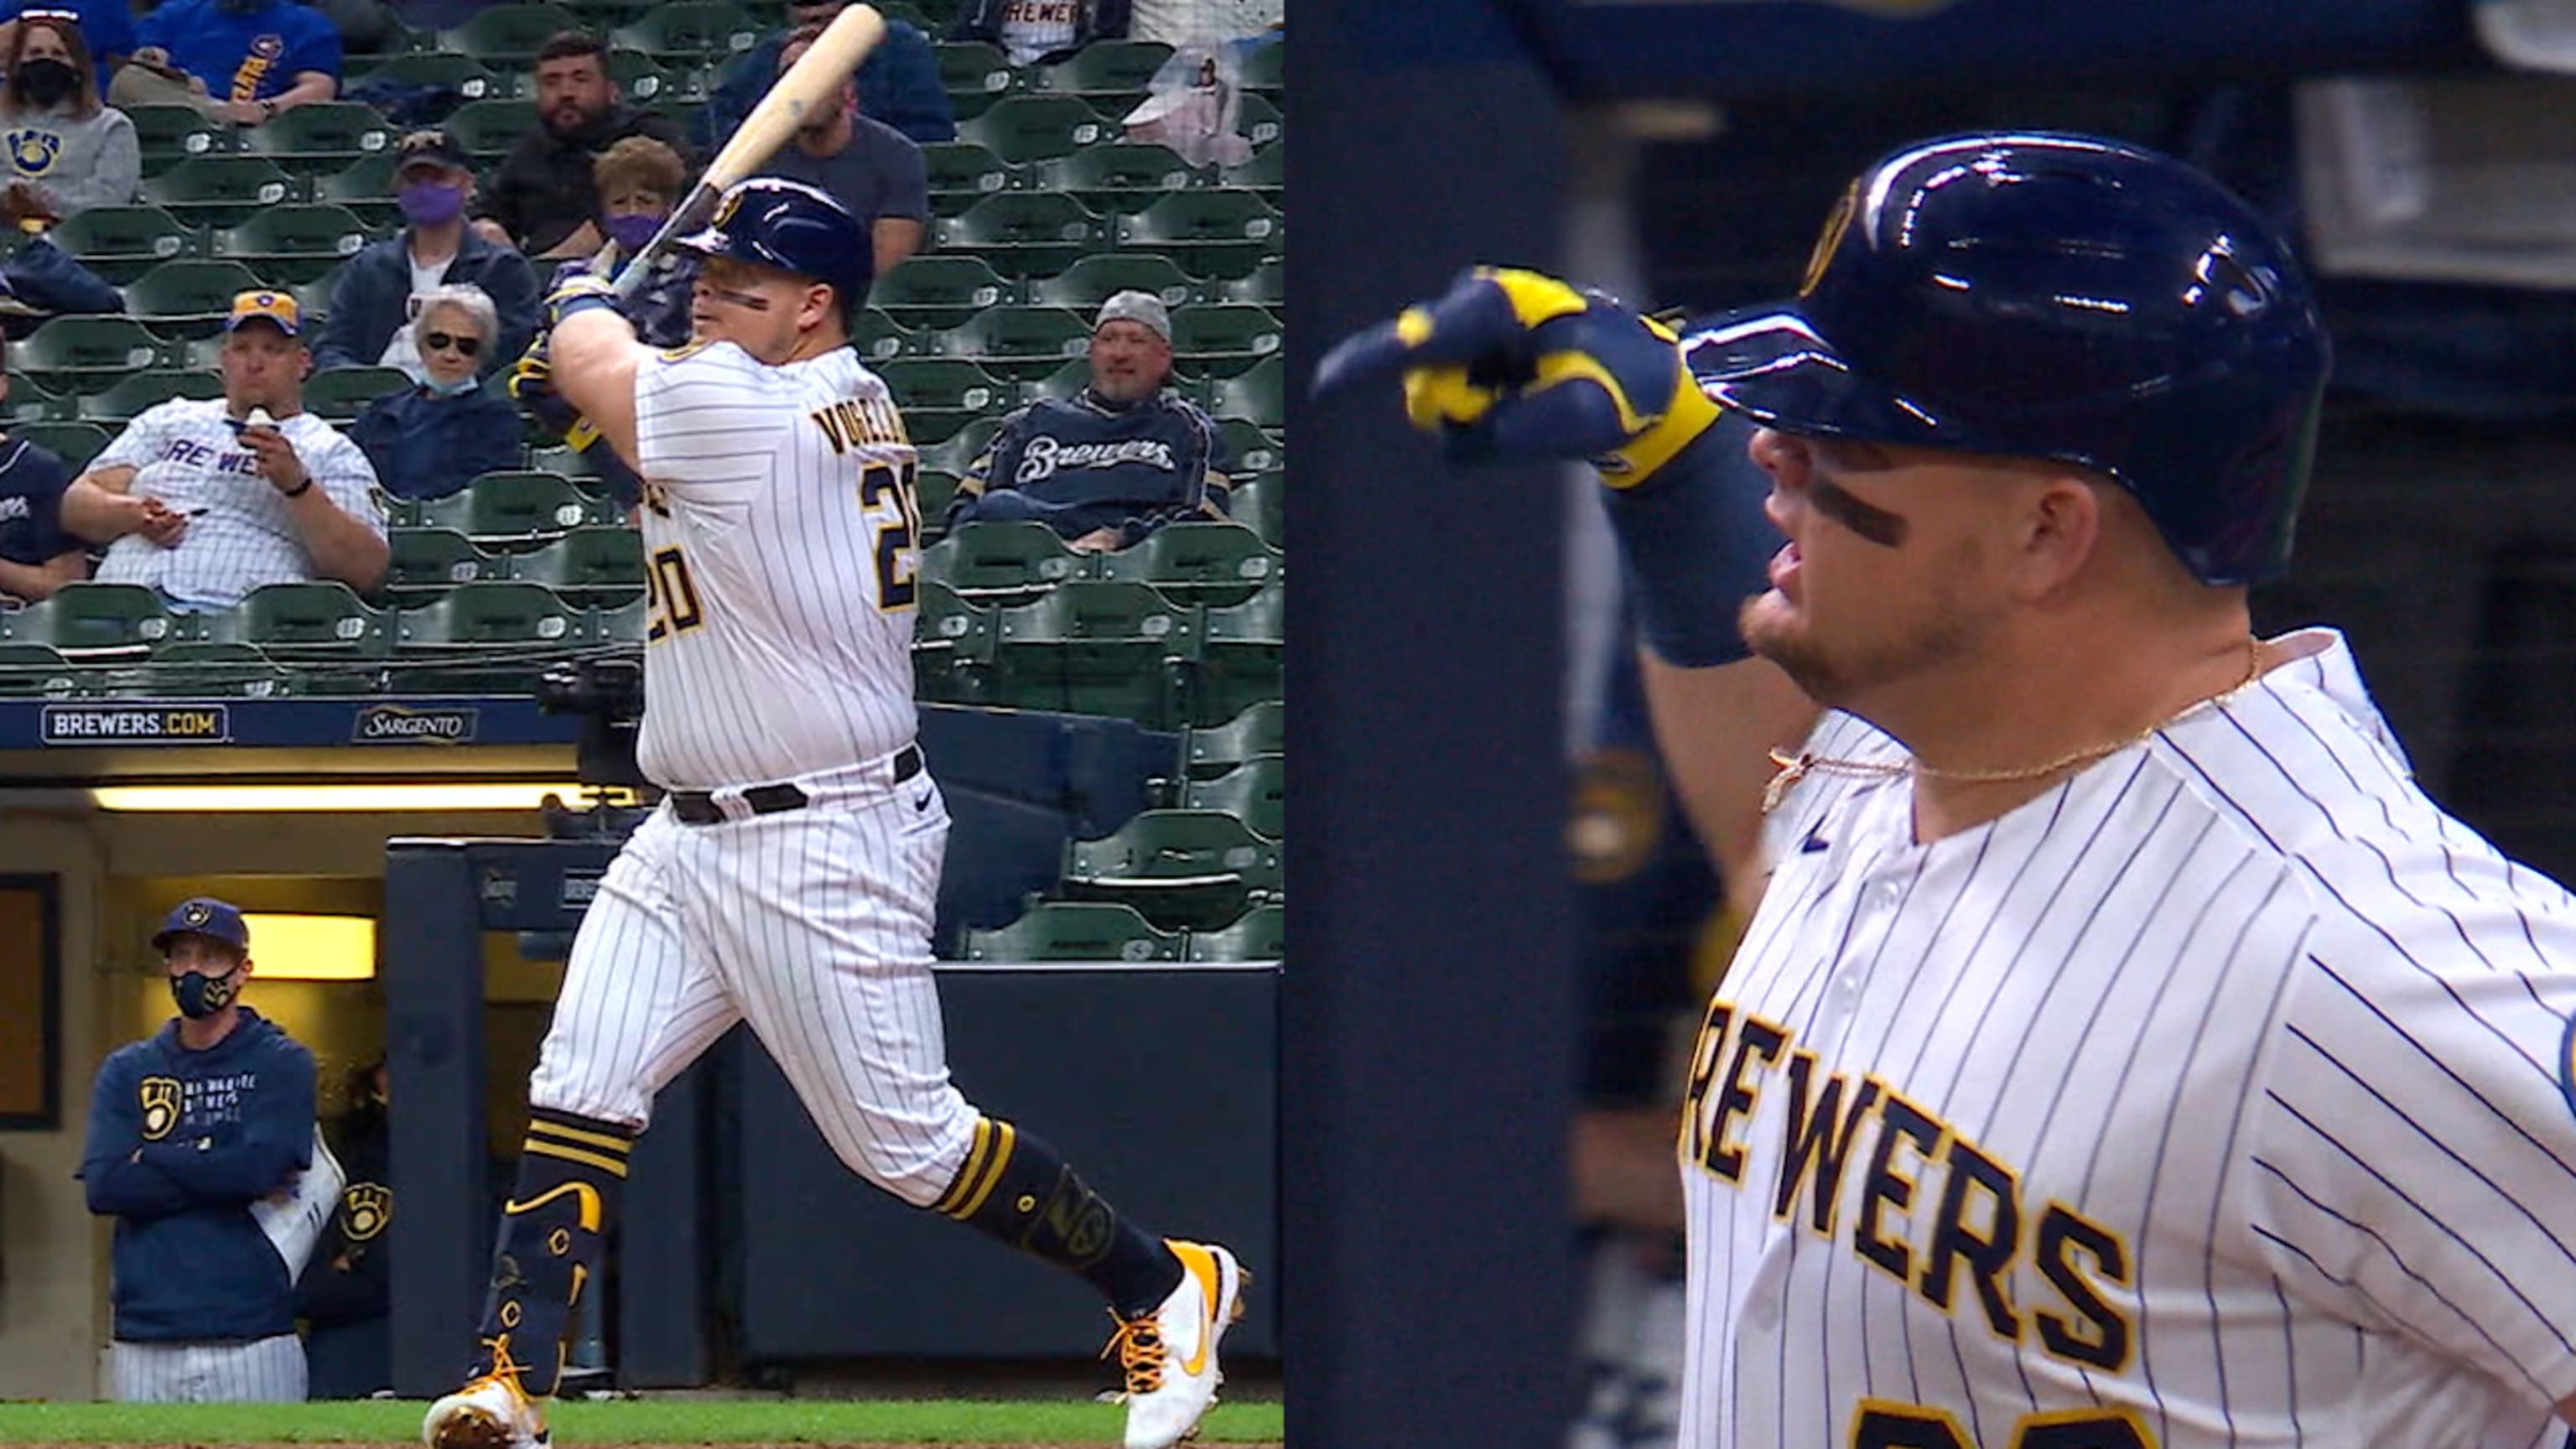 Daniel Vogelbach hits two home runs for Brewers